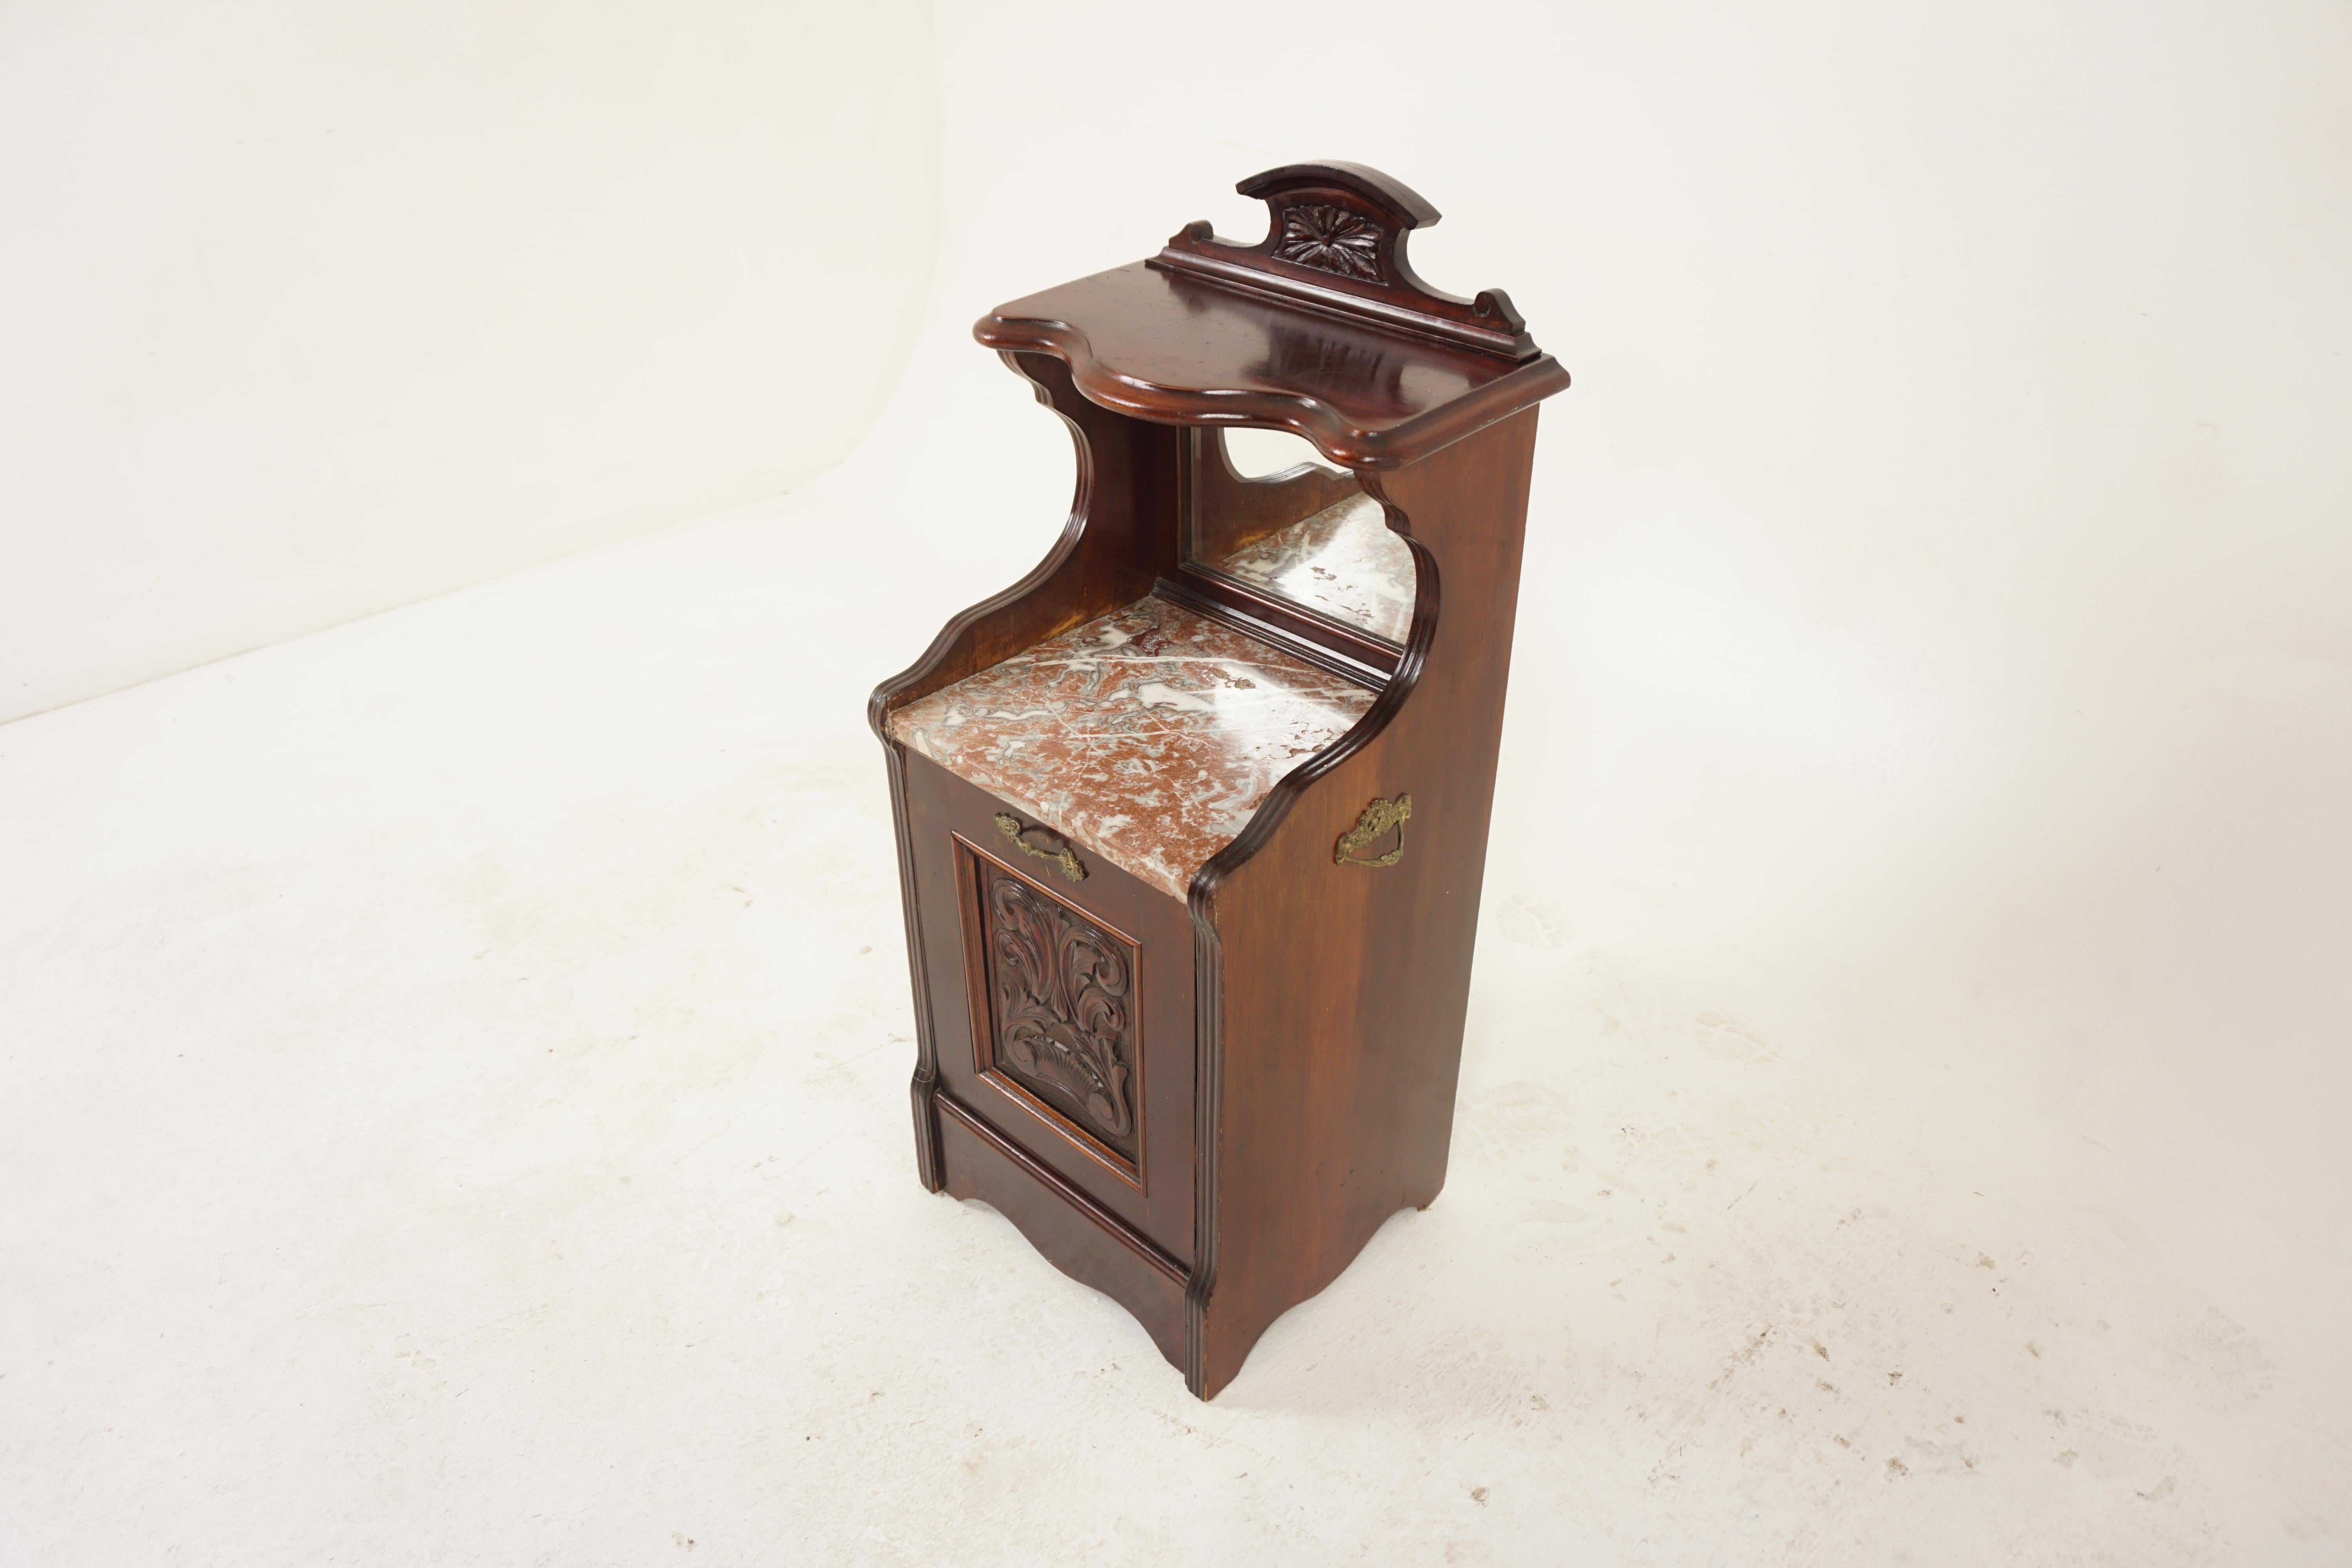 Antique Marble Top Coal Depot, Coal Box, lamp Table, Scotland 1890, H1177

Scotland 1890 
Solid Walnut
Original Finish 
Finely carved pediment to the top
With rectangular bevelled mirror below
Rouge marble top
Panelled carved door on front with